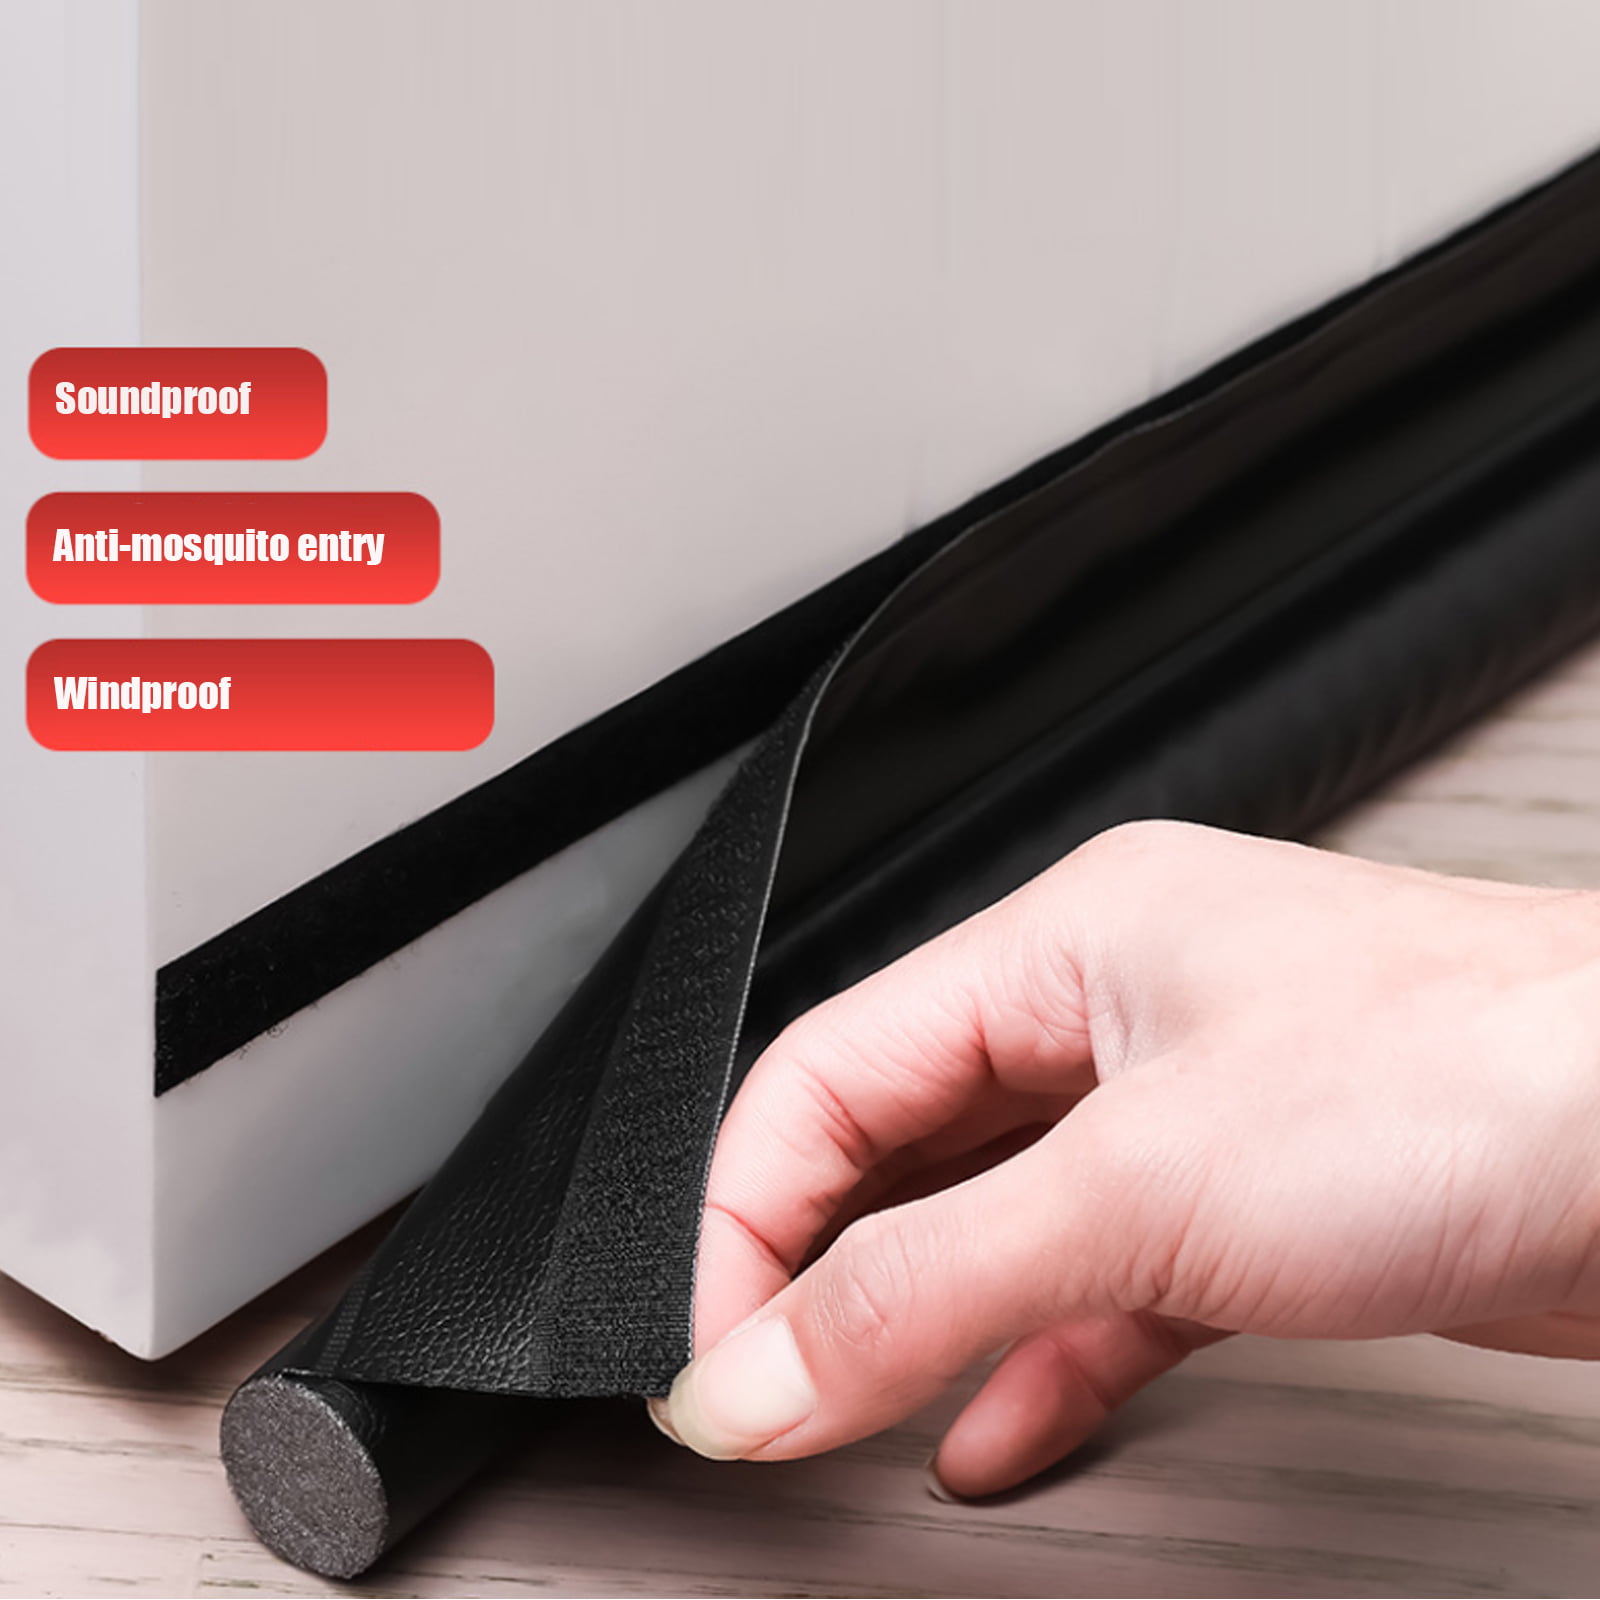 Wustrious 1pcs Door Seam Bottom Seal Door Draft Stopper Soundproof Dust-Proof Strip Draft Excluder Noise and Fumes Stopper 95cm